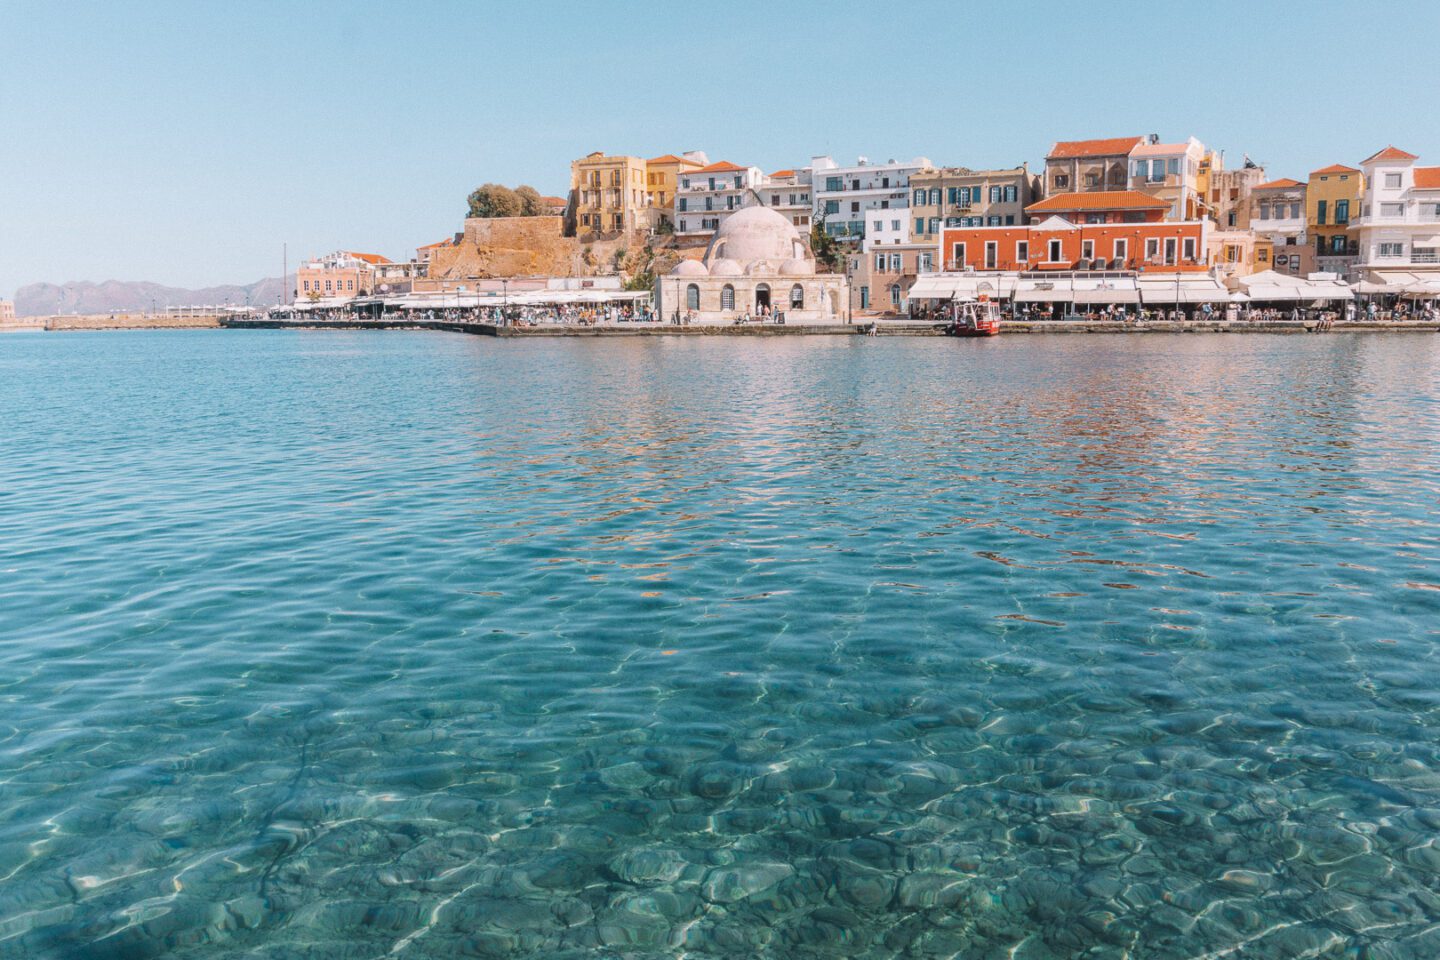 The colourful 14th-century Venetian harbour of Chania, Crete in Greece, with the crystal clear blue waters in the foreground. A must-see on your 10 days in Greece itinerary